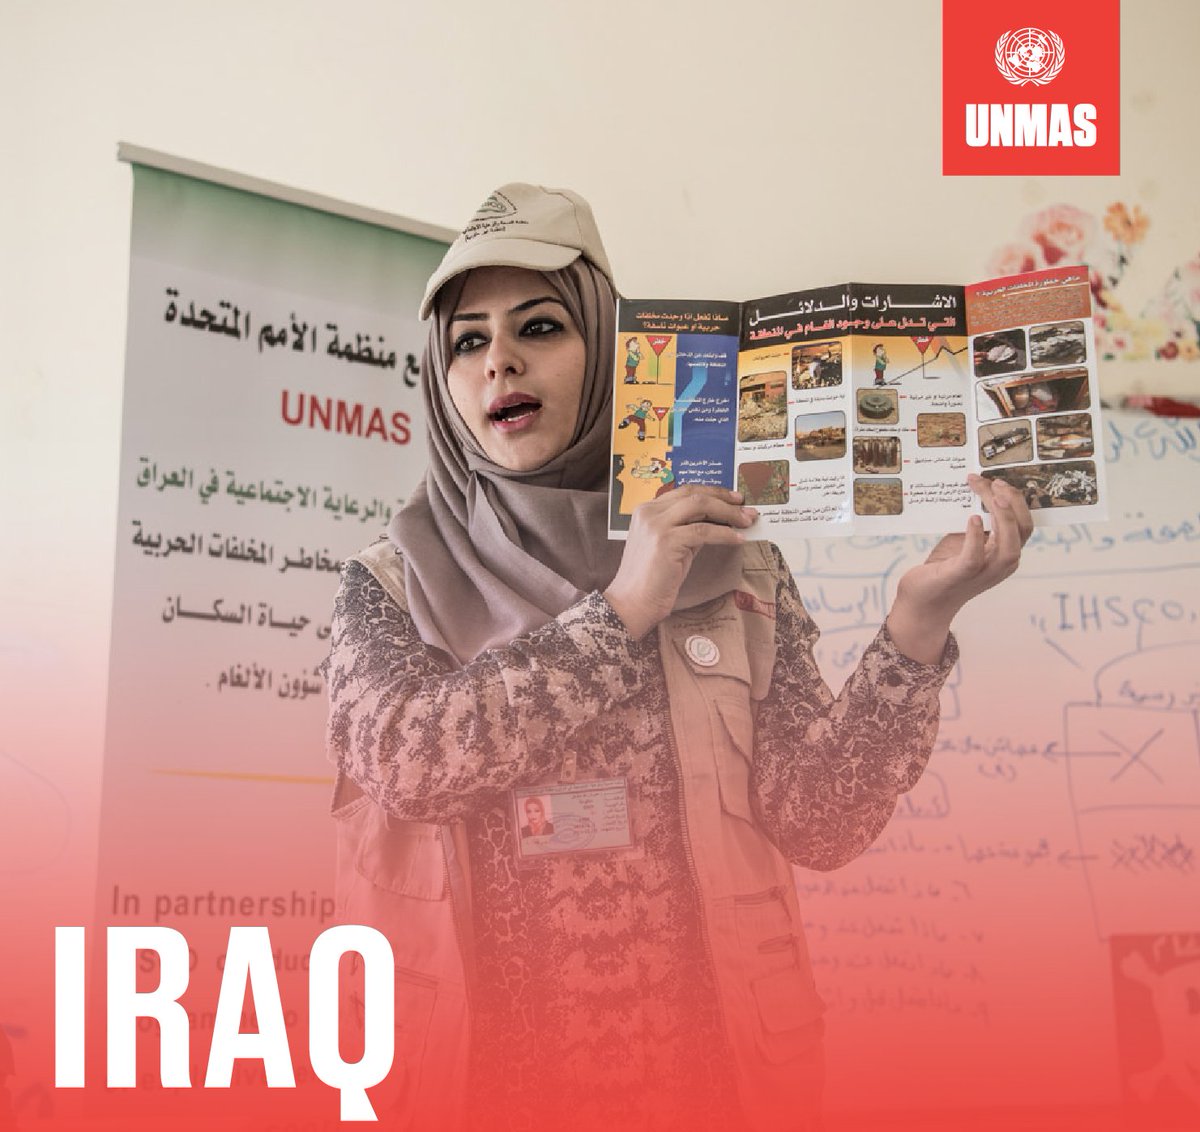 📌#DidYouKnow the work of UNMAS #Iraq? ✅24,213 locals received #EORE ✅2,481,934 square metres of land cleared and 5,186 #EO items removed ✅316 police officers from the Government of Iraq Ministry of Interior, provided #EOD and #IED disposal training 👉bit.ly/3xSpPvx